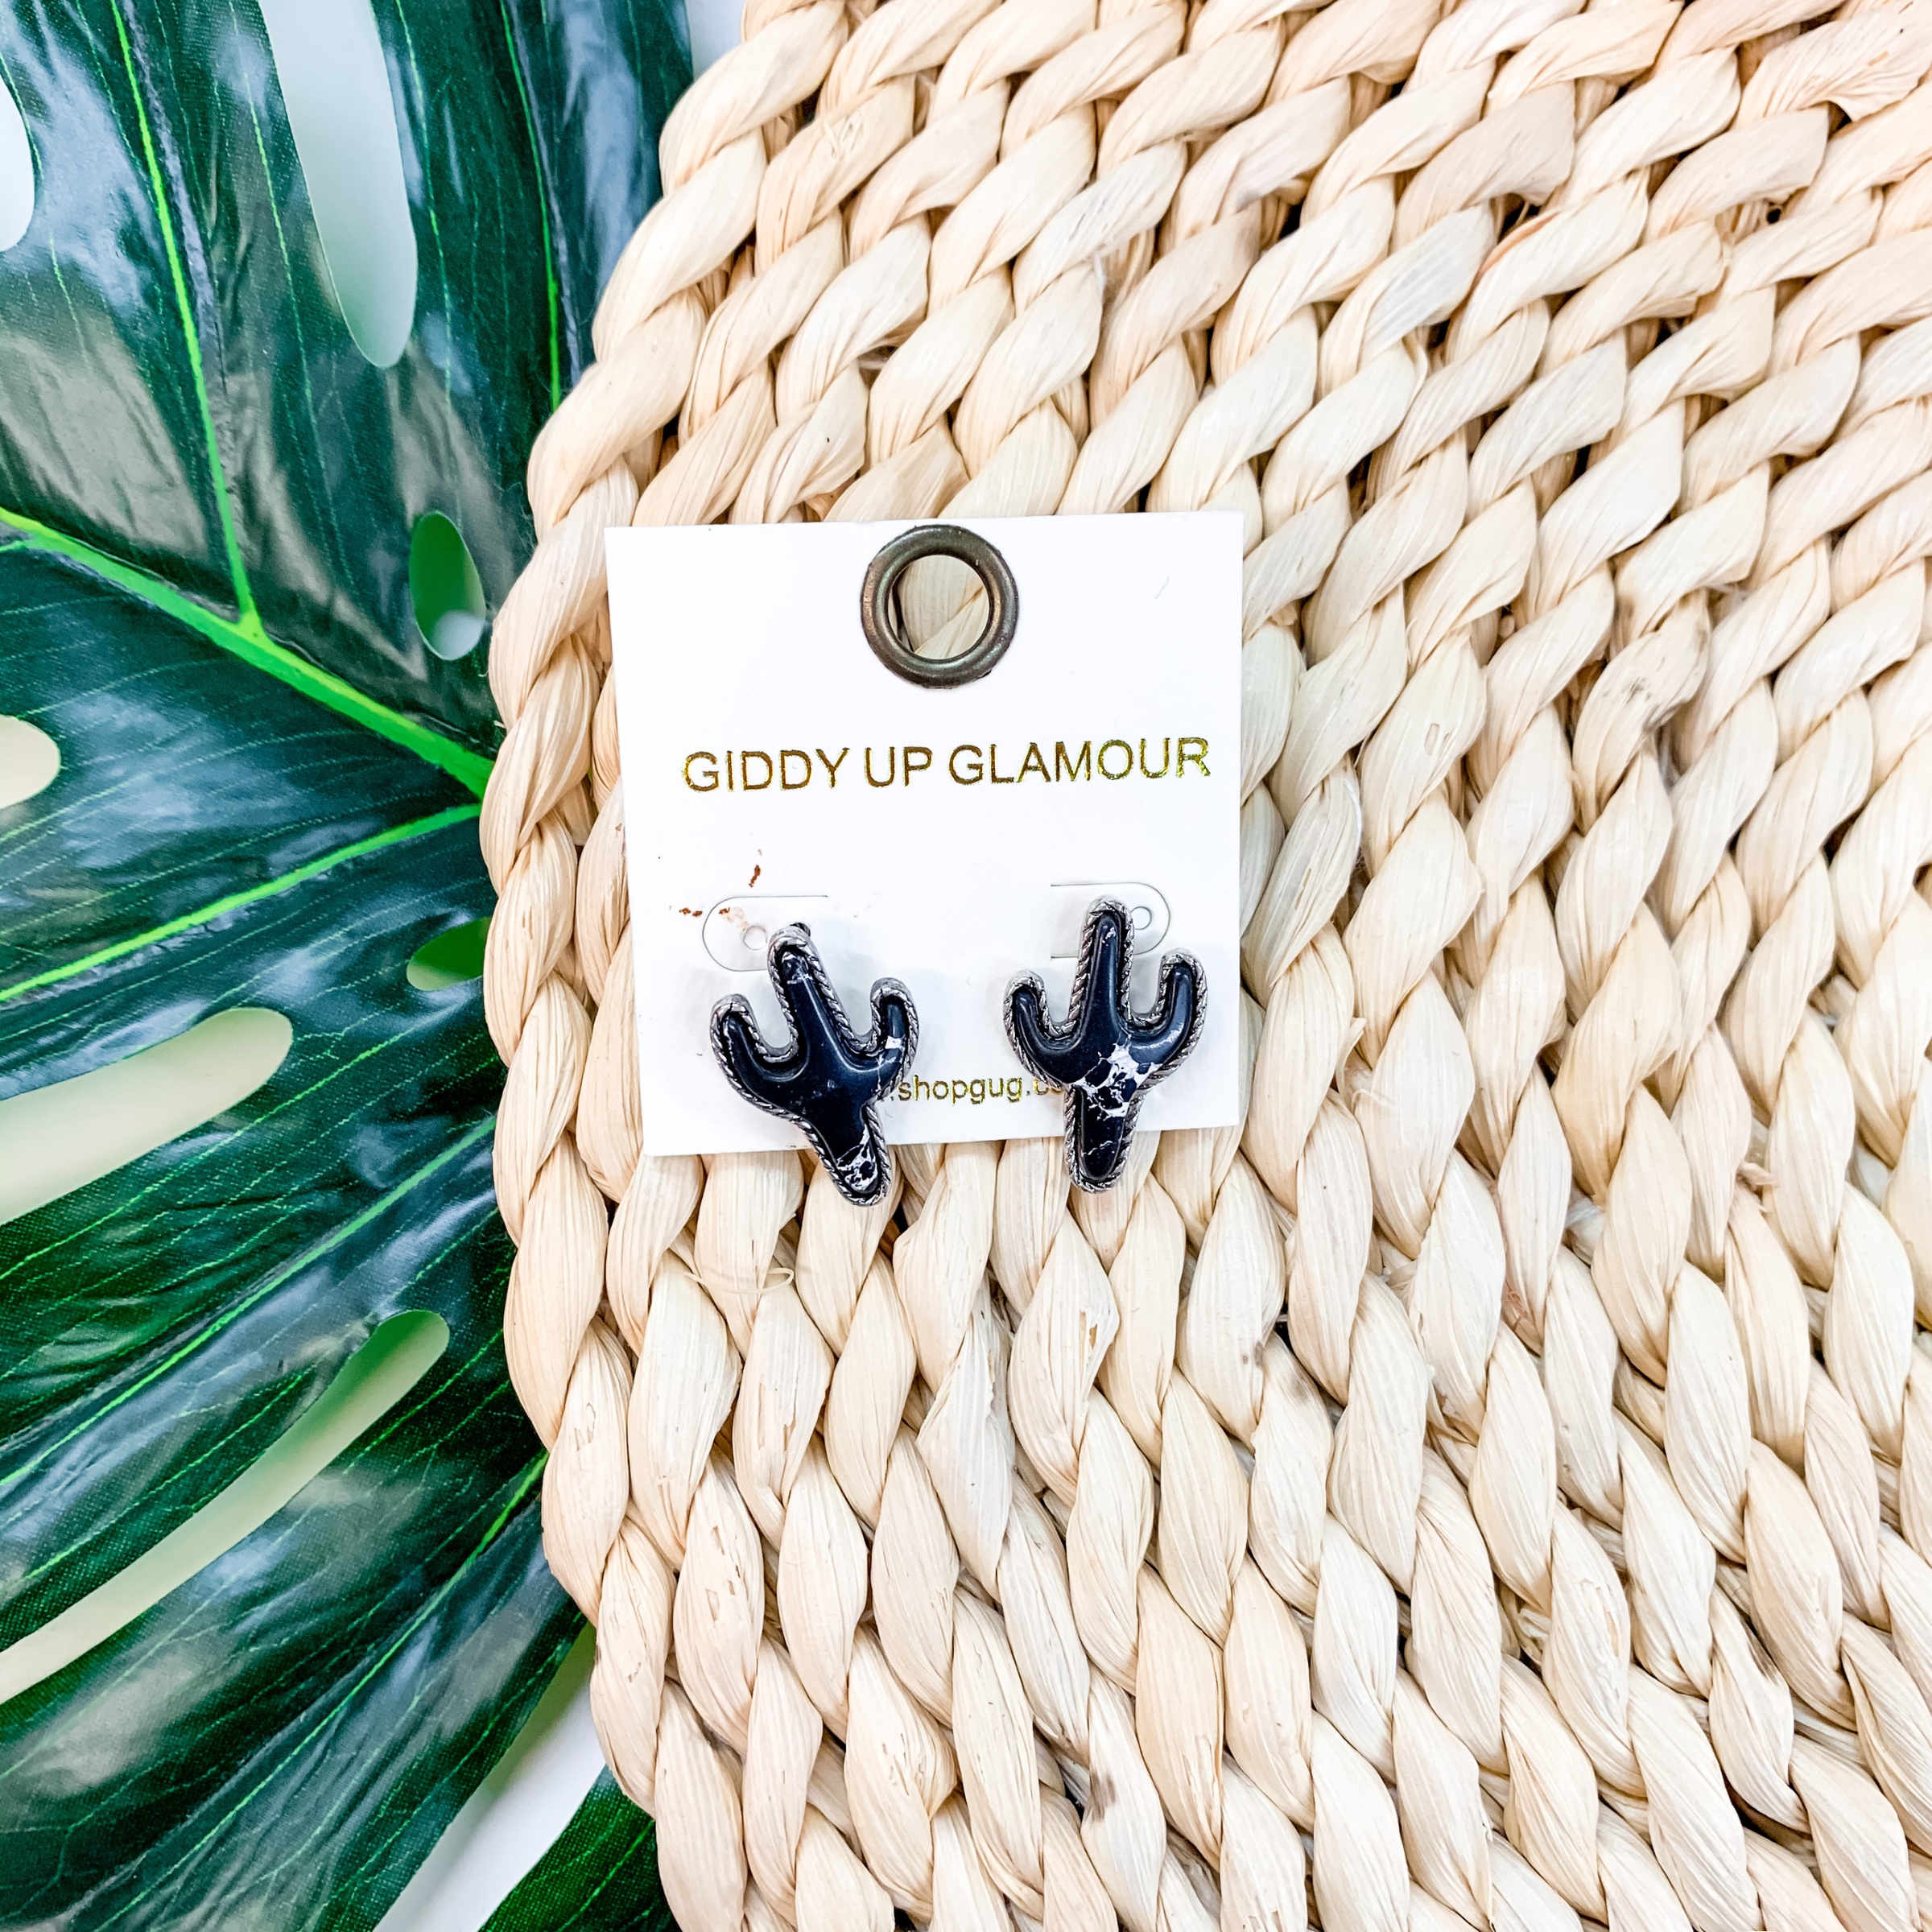 Desert Dreamin' Cactus Stud Earrings in Black - Giddy Up Glamour Boutique